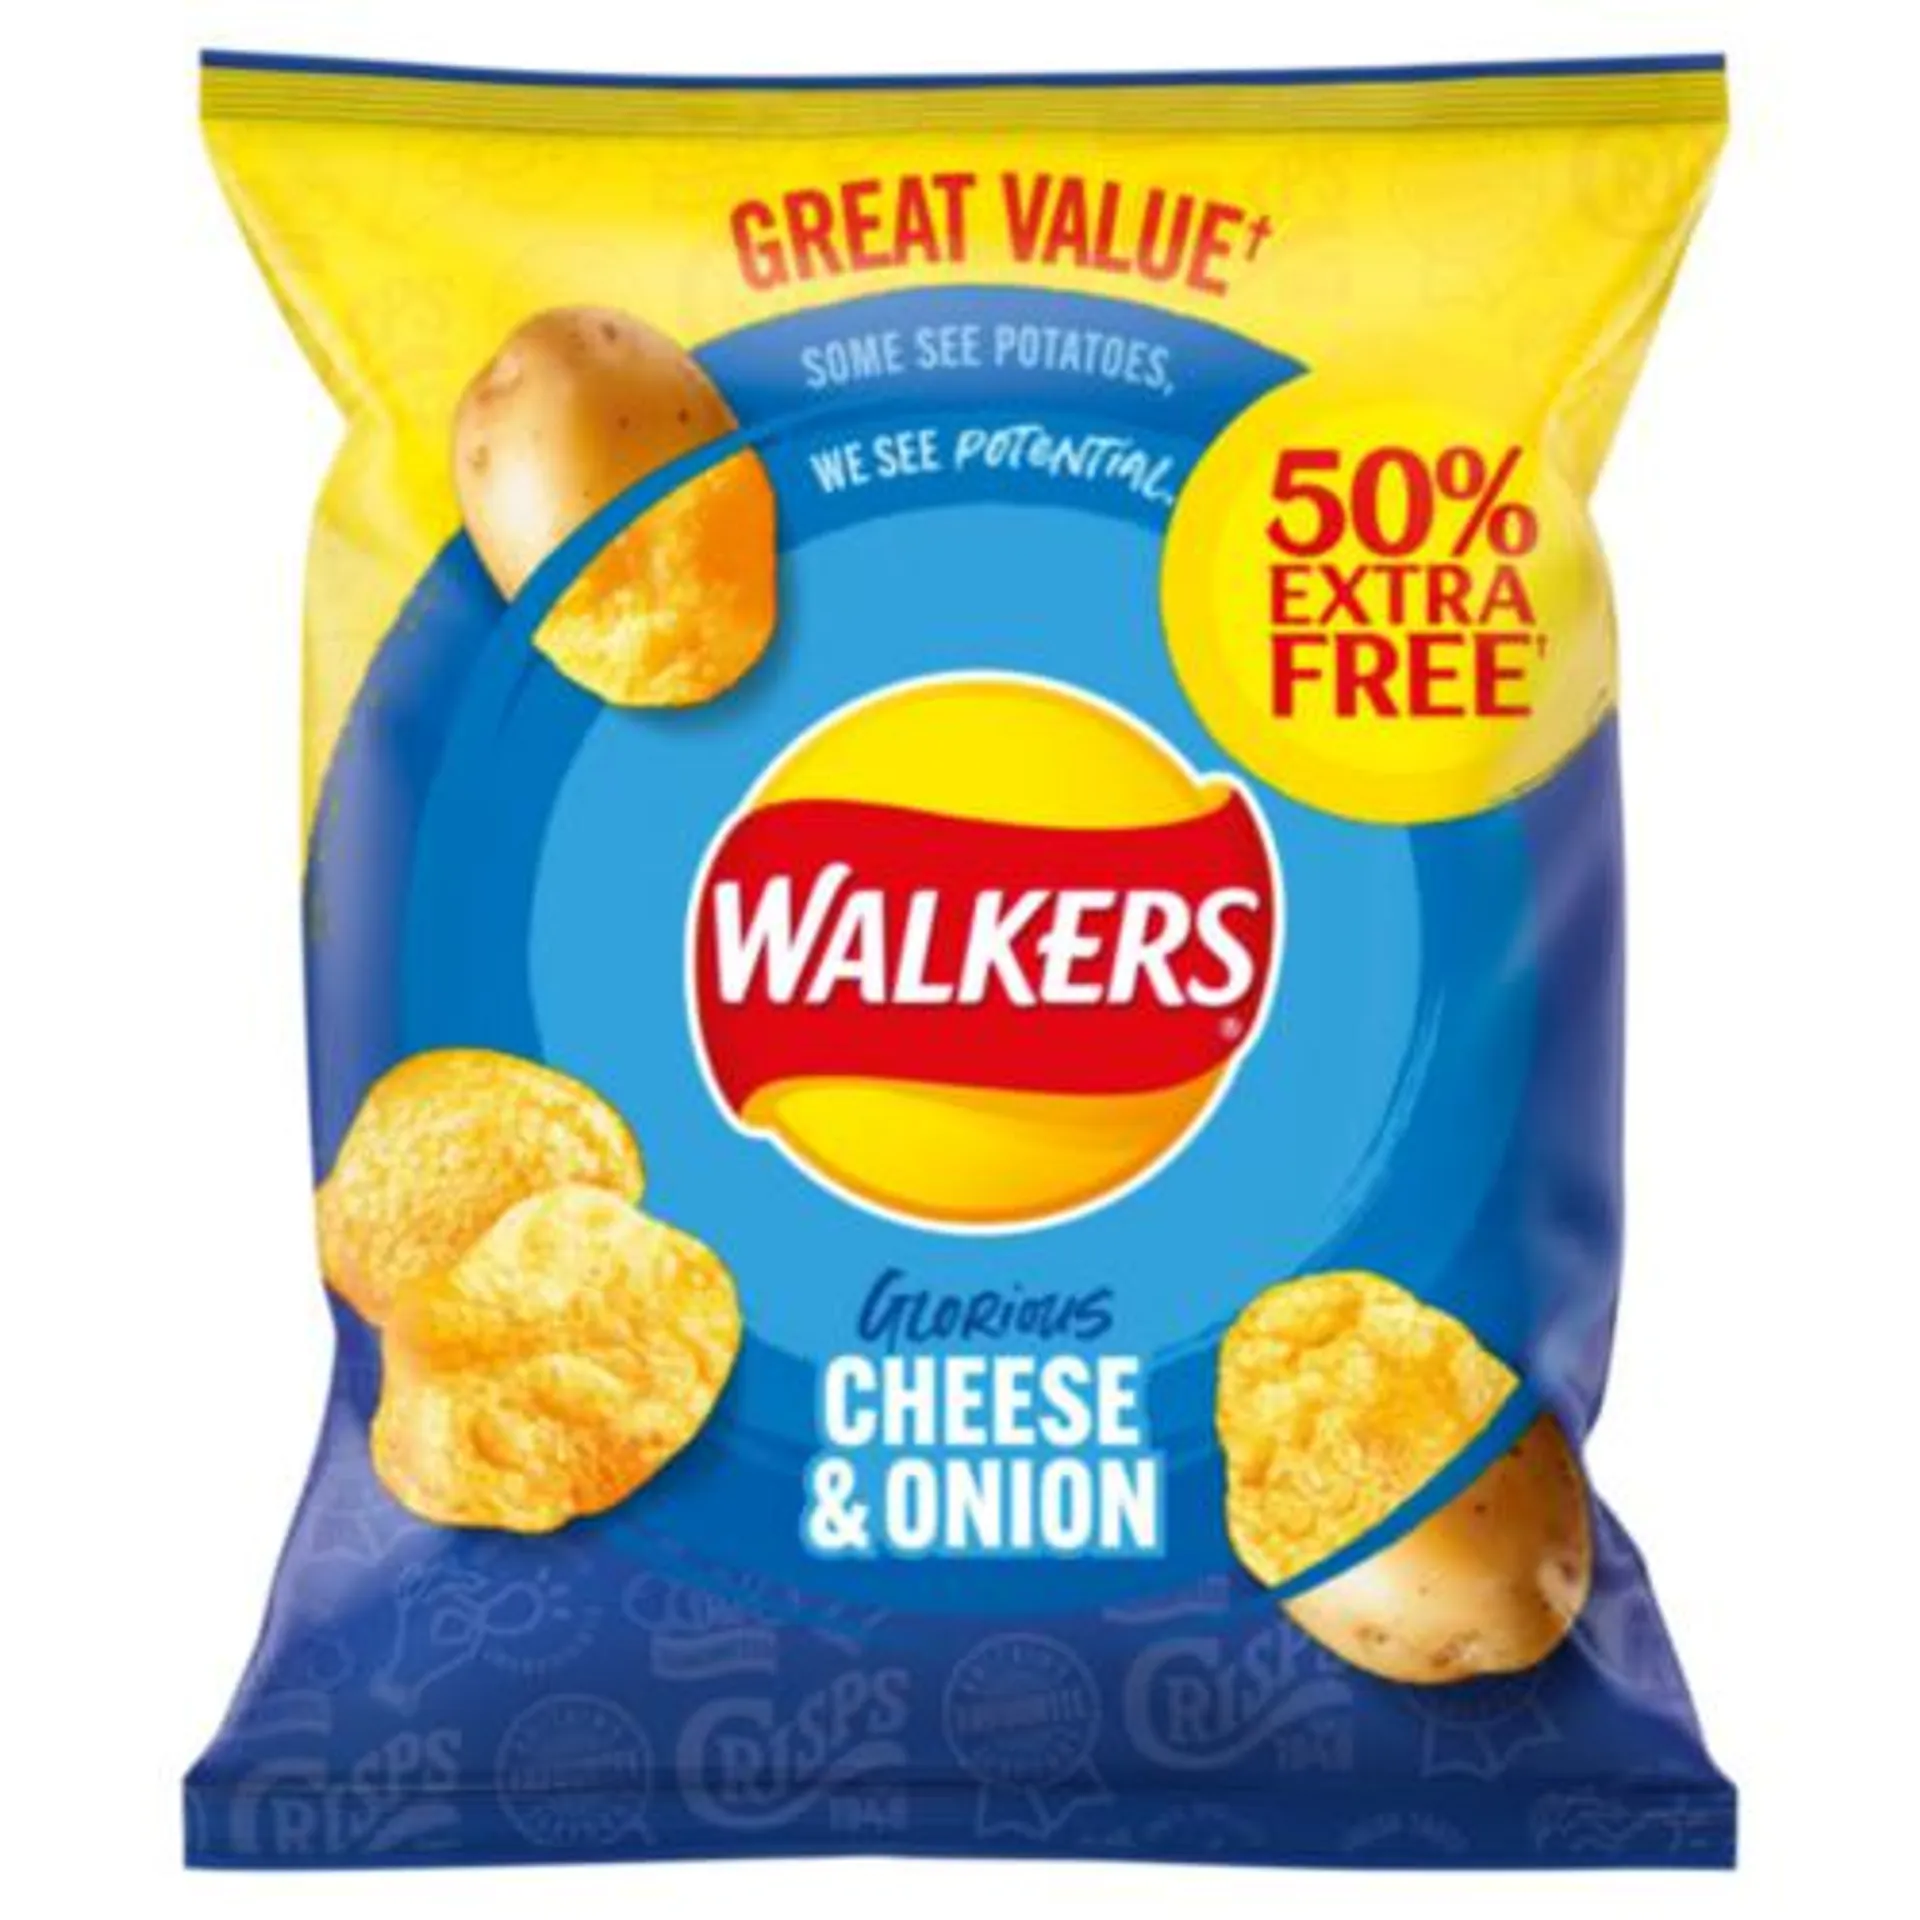 Walkers Cheese & Onion Crisps 50% Extra Free Bag